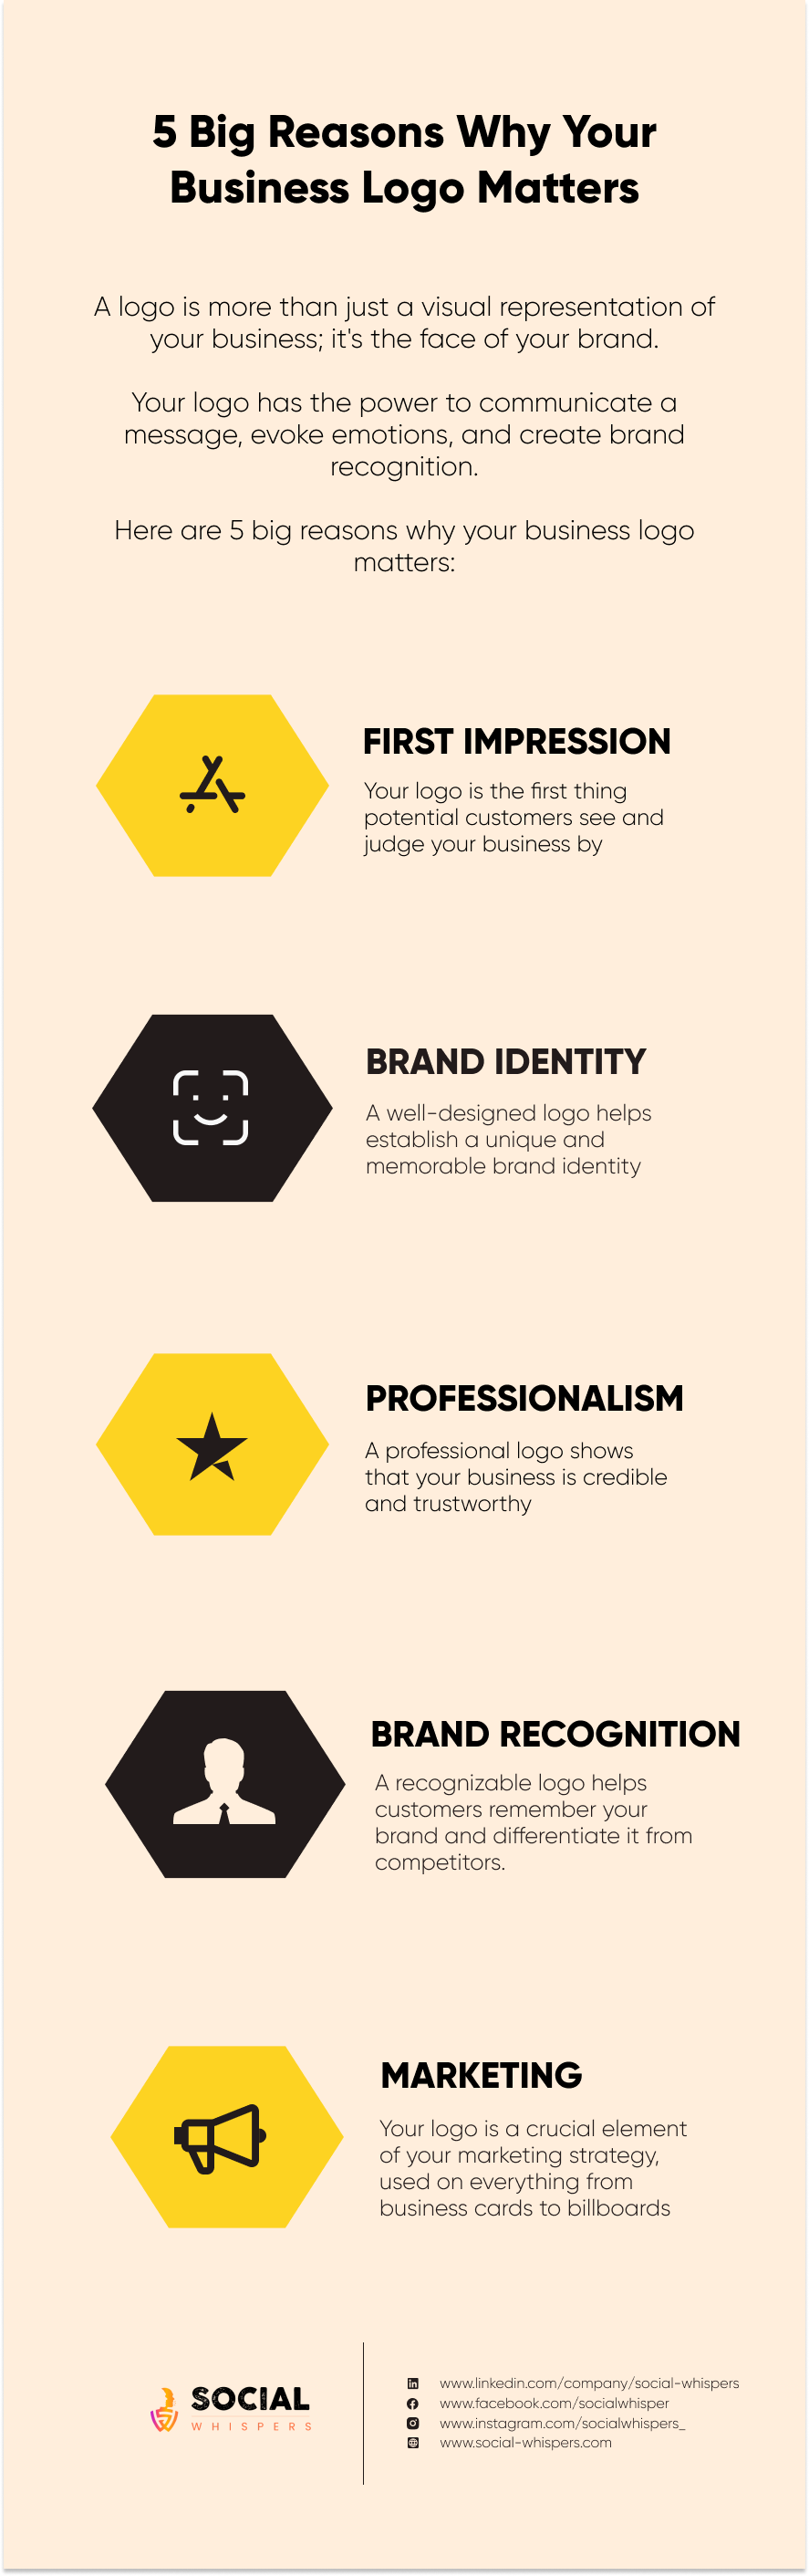 reasons why business logo matters?